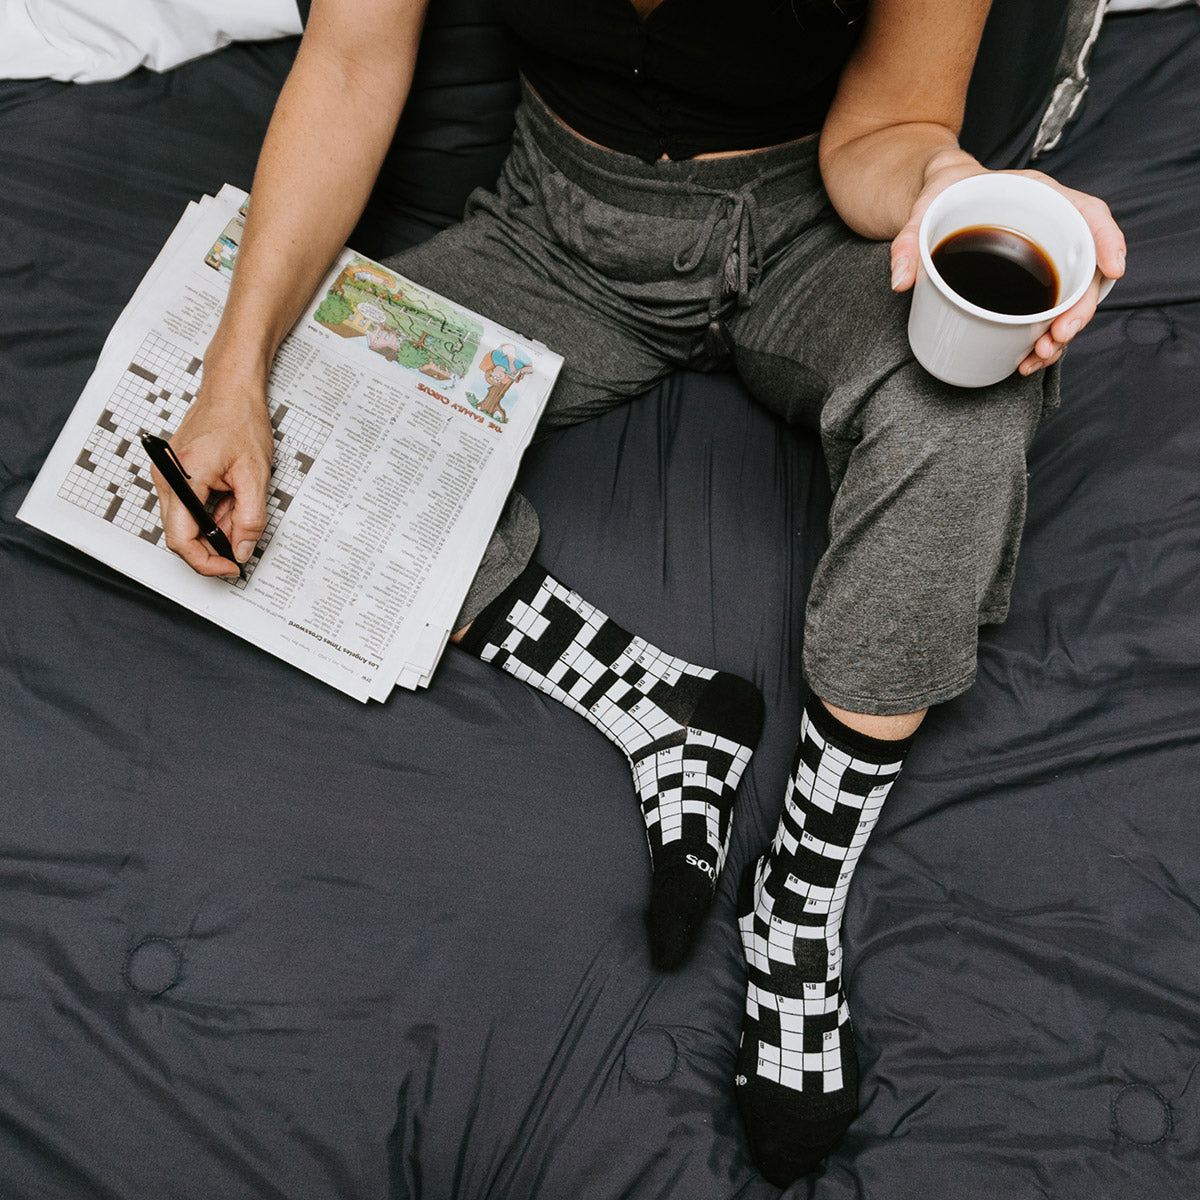 A woman wears crossword socks on a bed while doing a crossword puzzle and holding a cup of coffee